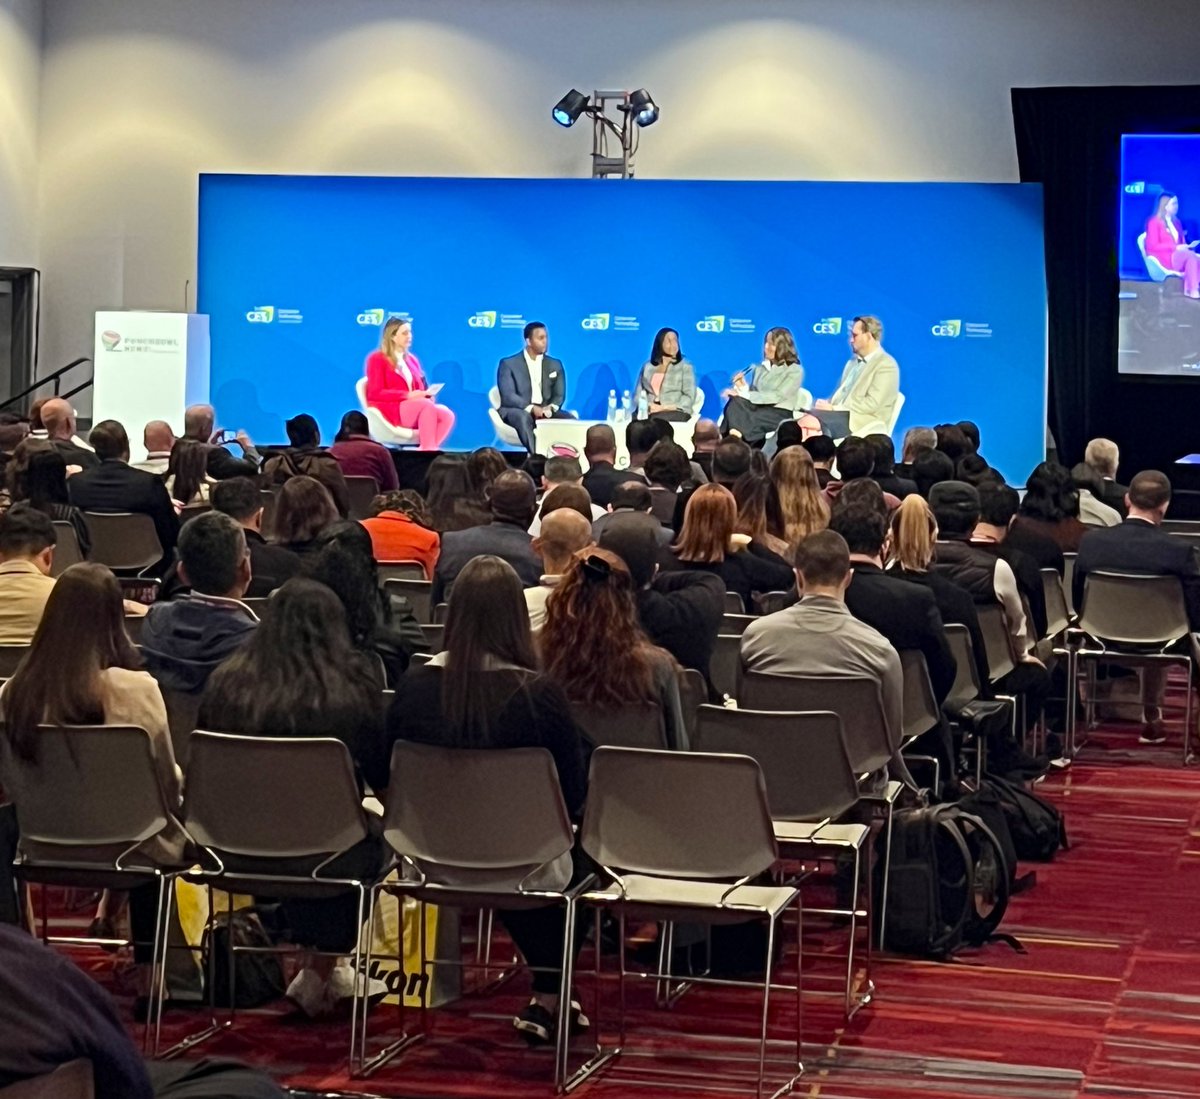 Packed house at the @PunchbowlNews @CTATech #LeadersinTechnology panel  on how technology can Advance #HealthEquity #InnovationPolicy   #DiGiTALhealth #IPS2023 @CatherineLPugh @jgulshen @MRC24 #CES2023